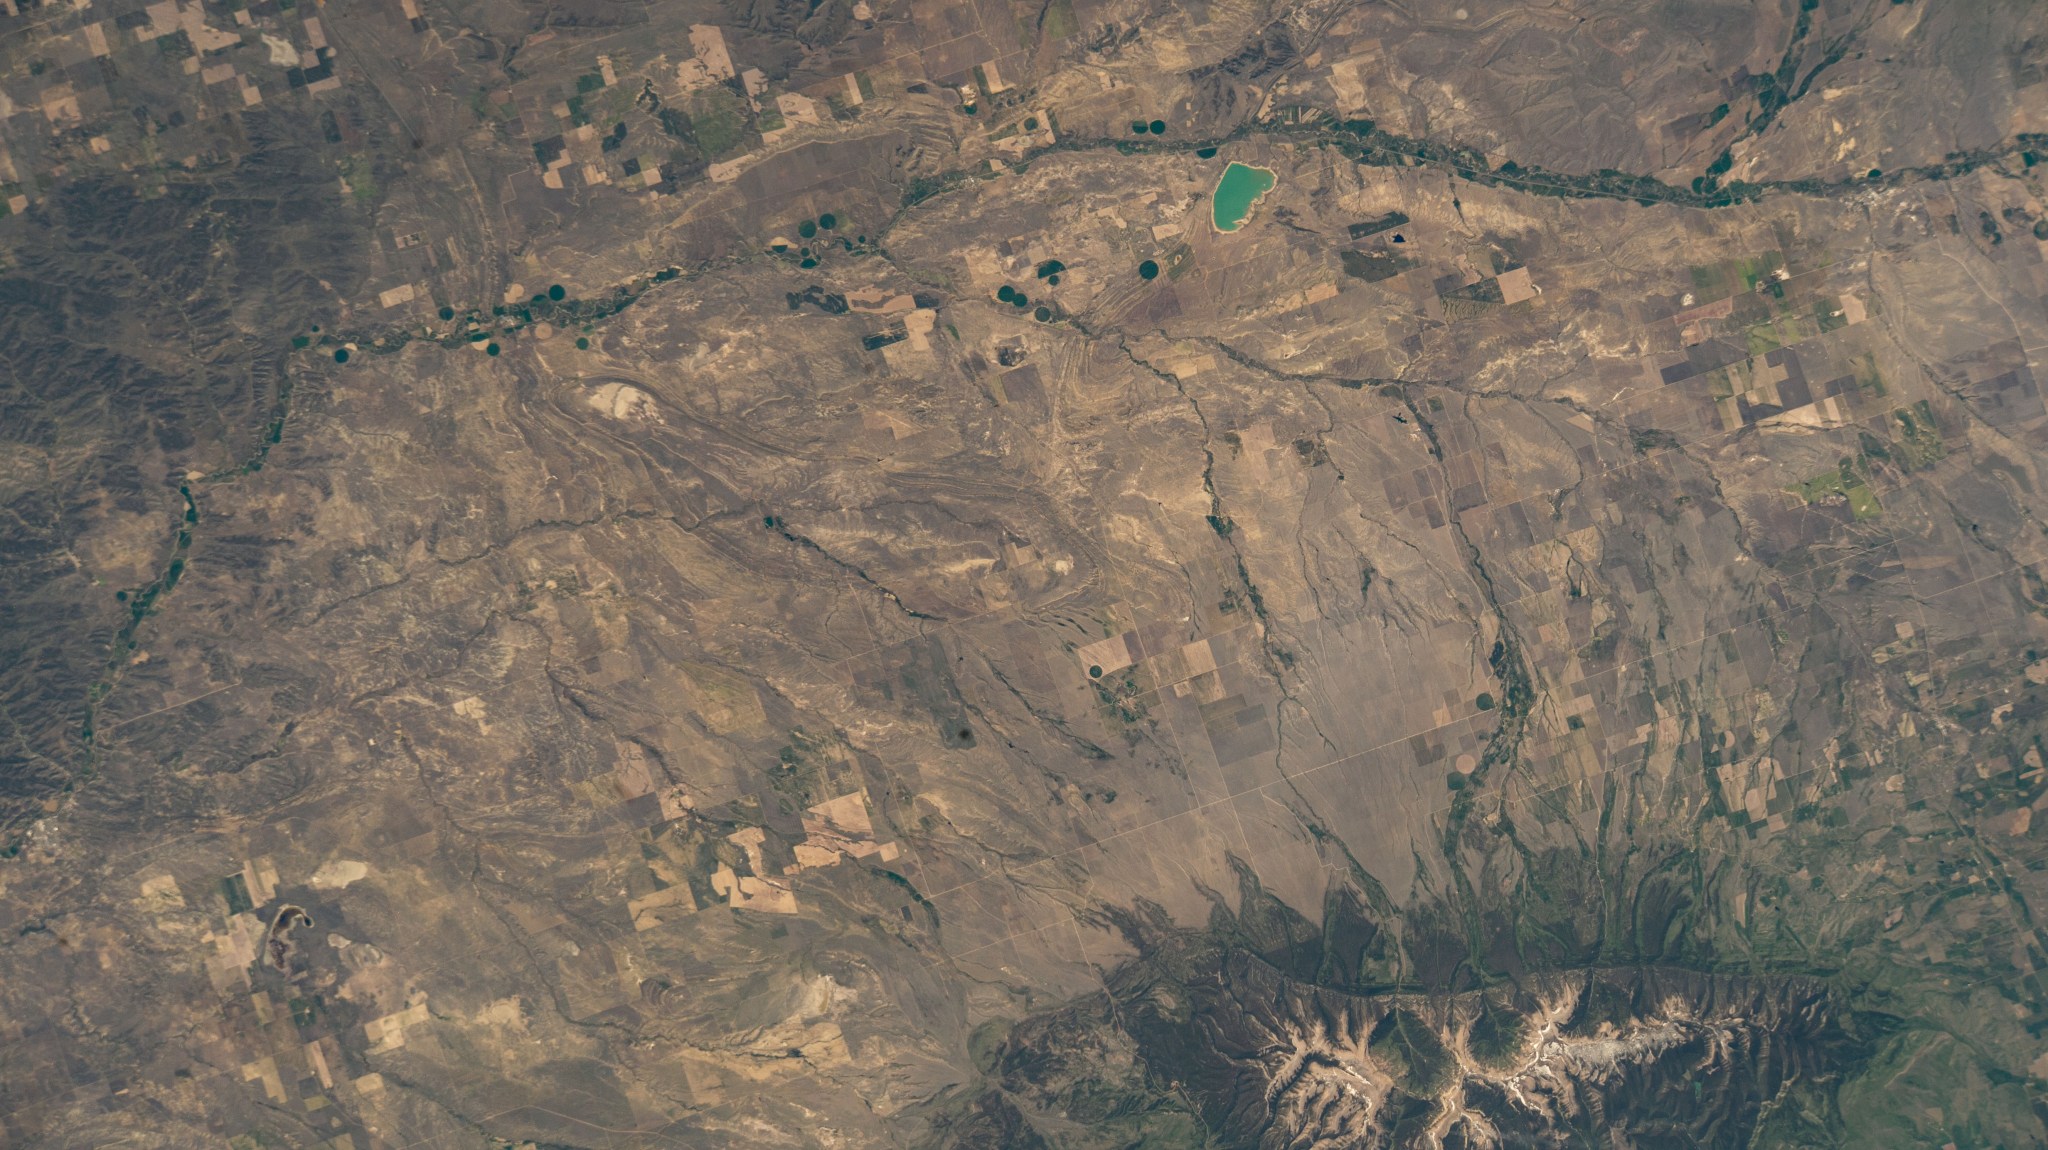 Old Baldy Mountain peak (bottom right) and Dead Man's Basin Reservoir (top) in Montana are pictured from the International Space Station as it orbited 264 miles above North America.